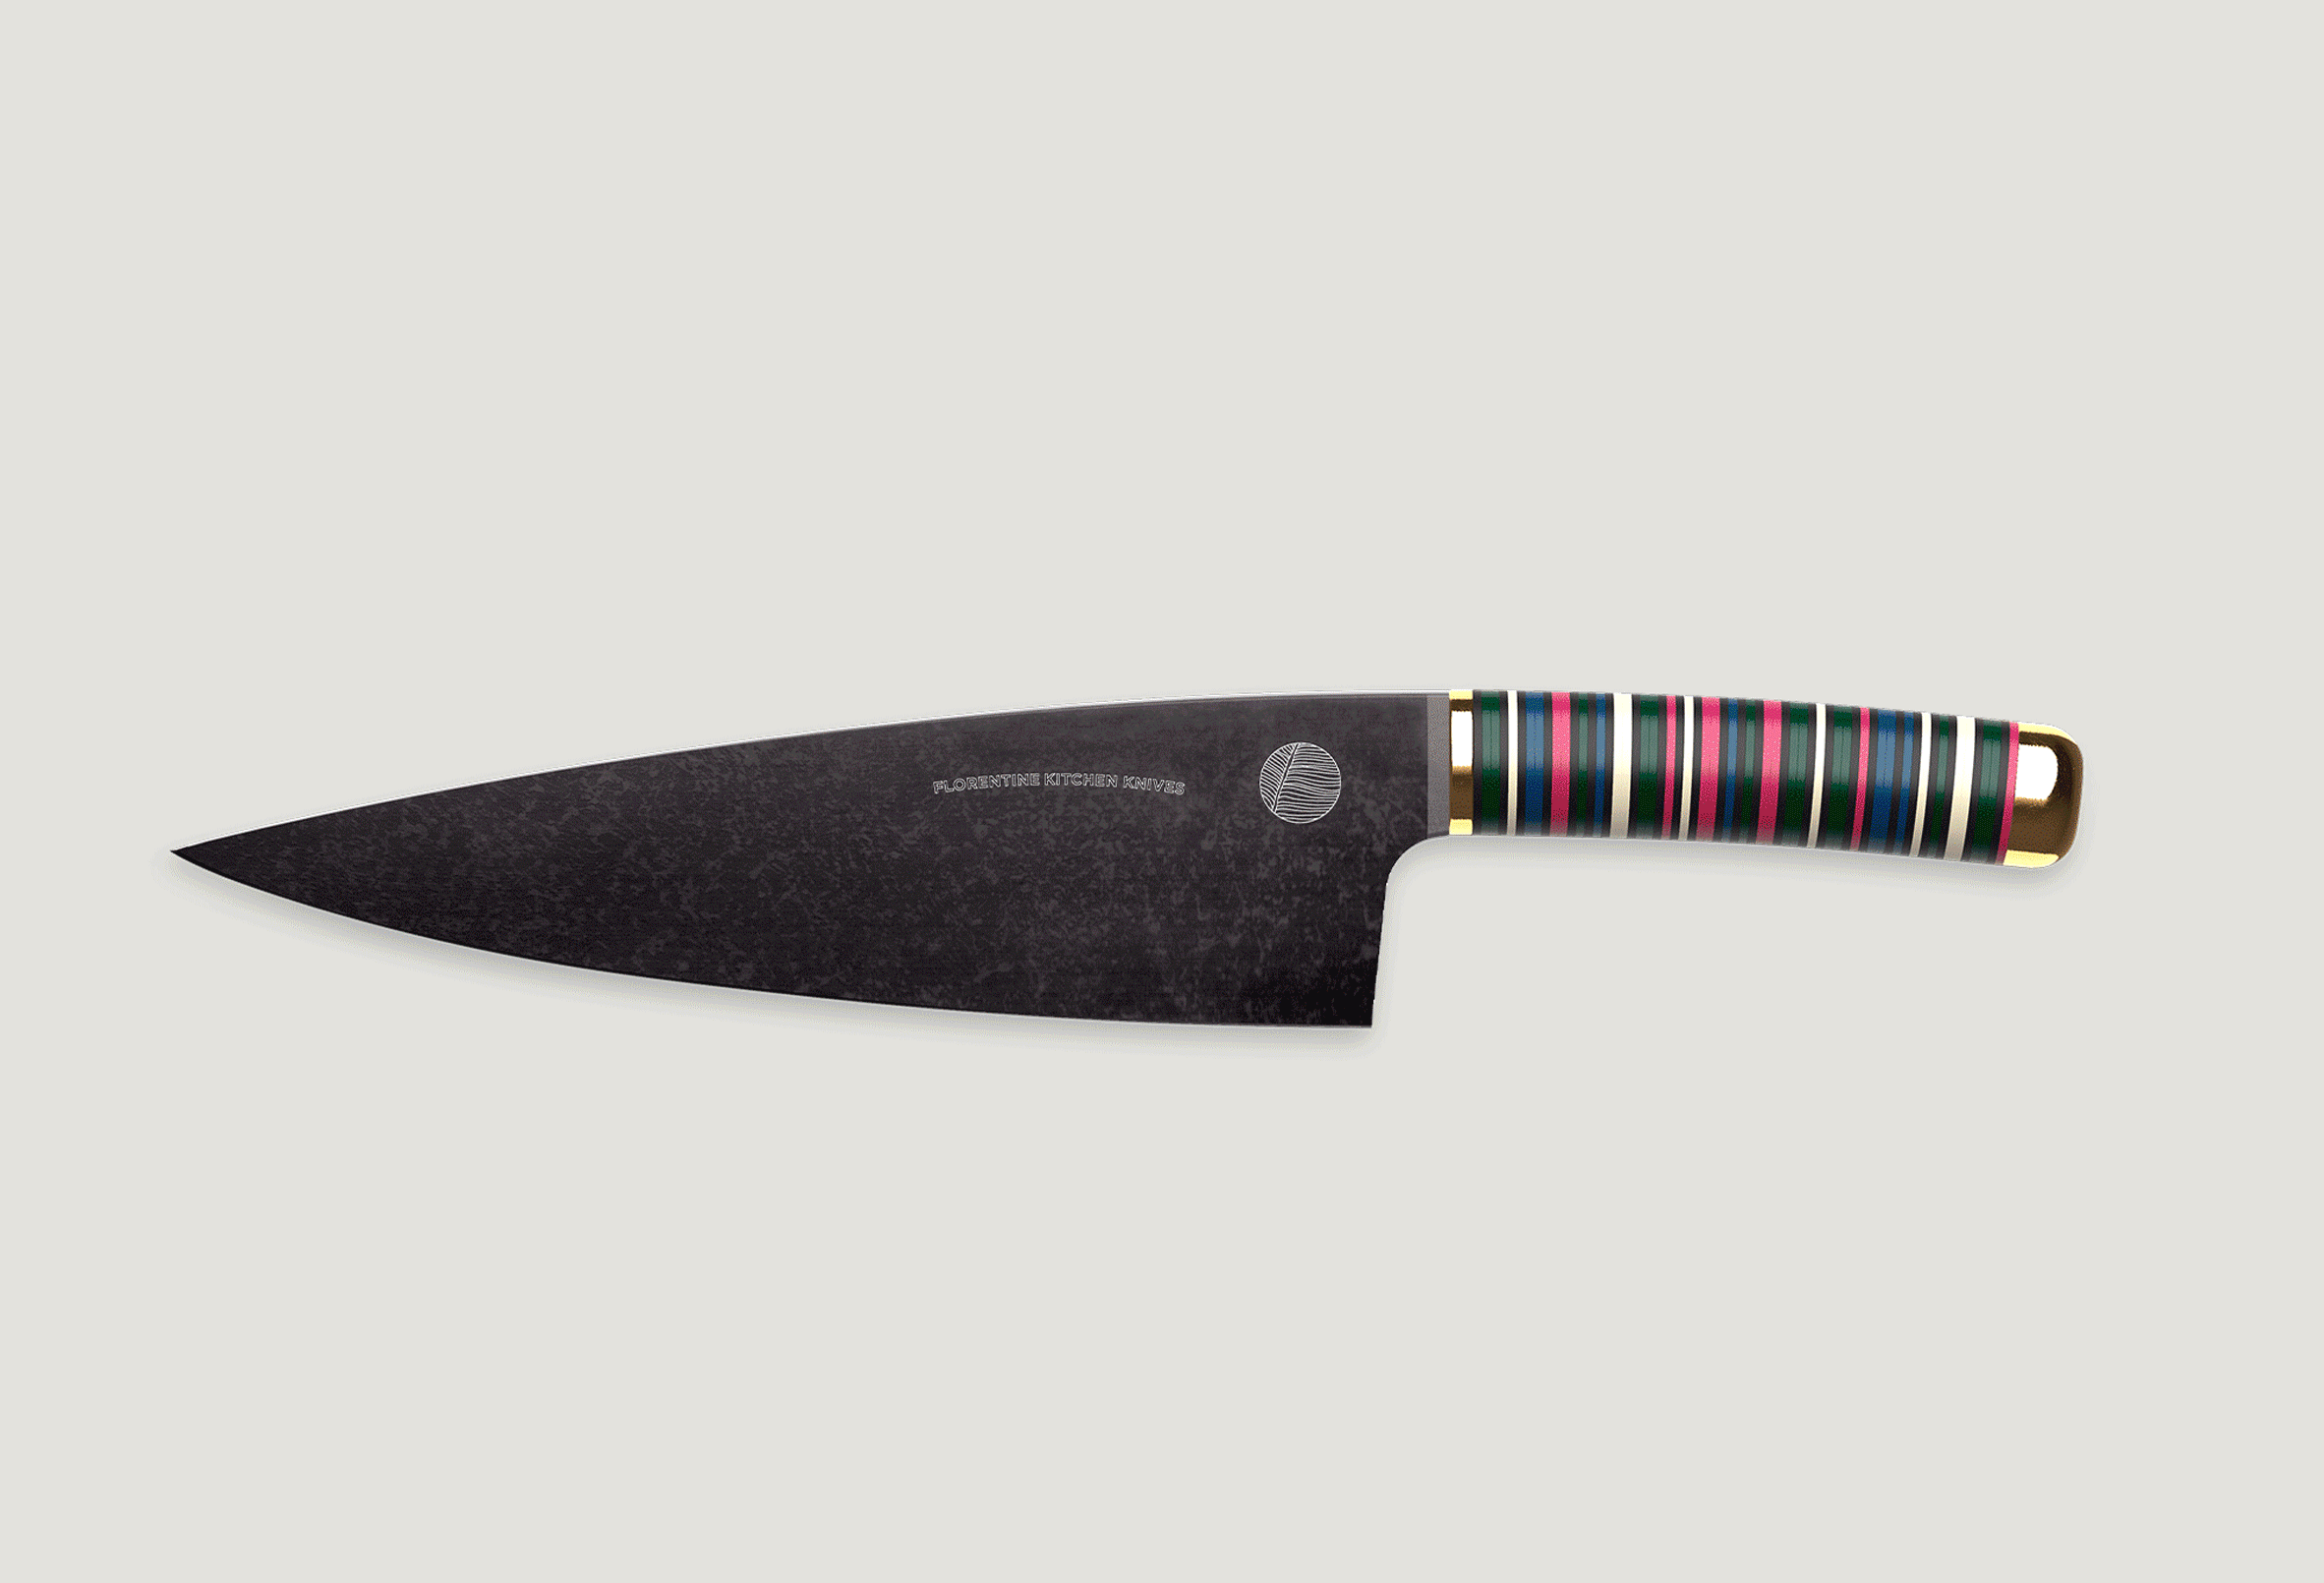 Chef blade and handle options by Florentine Kitchen Knives FKK